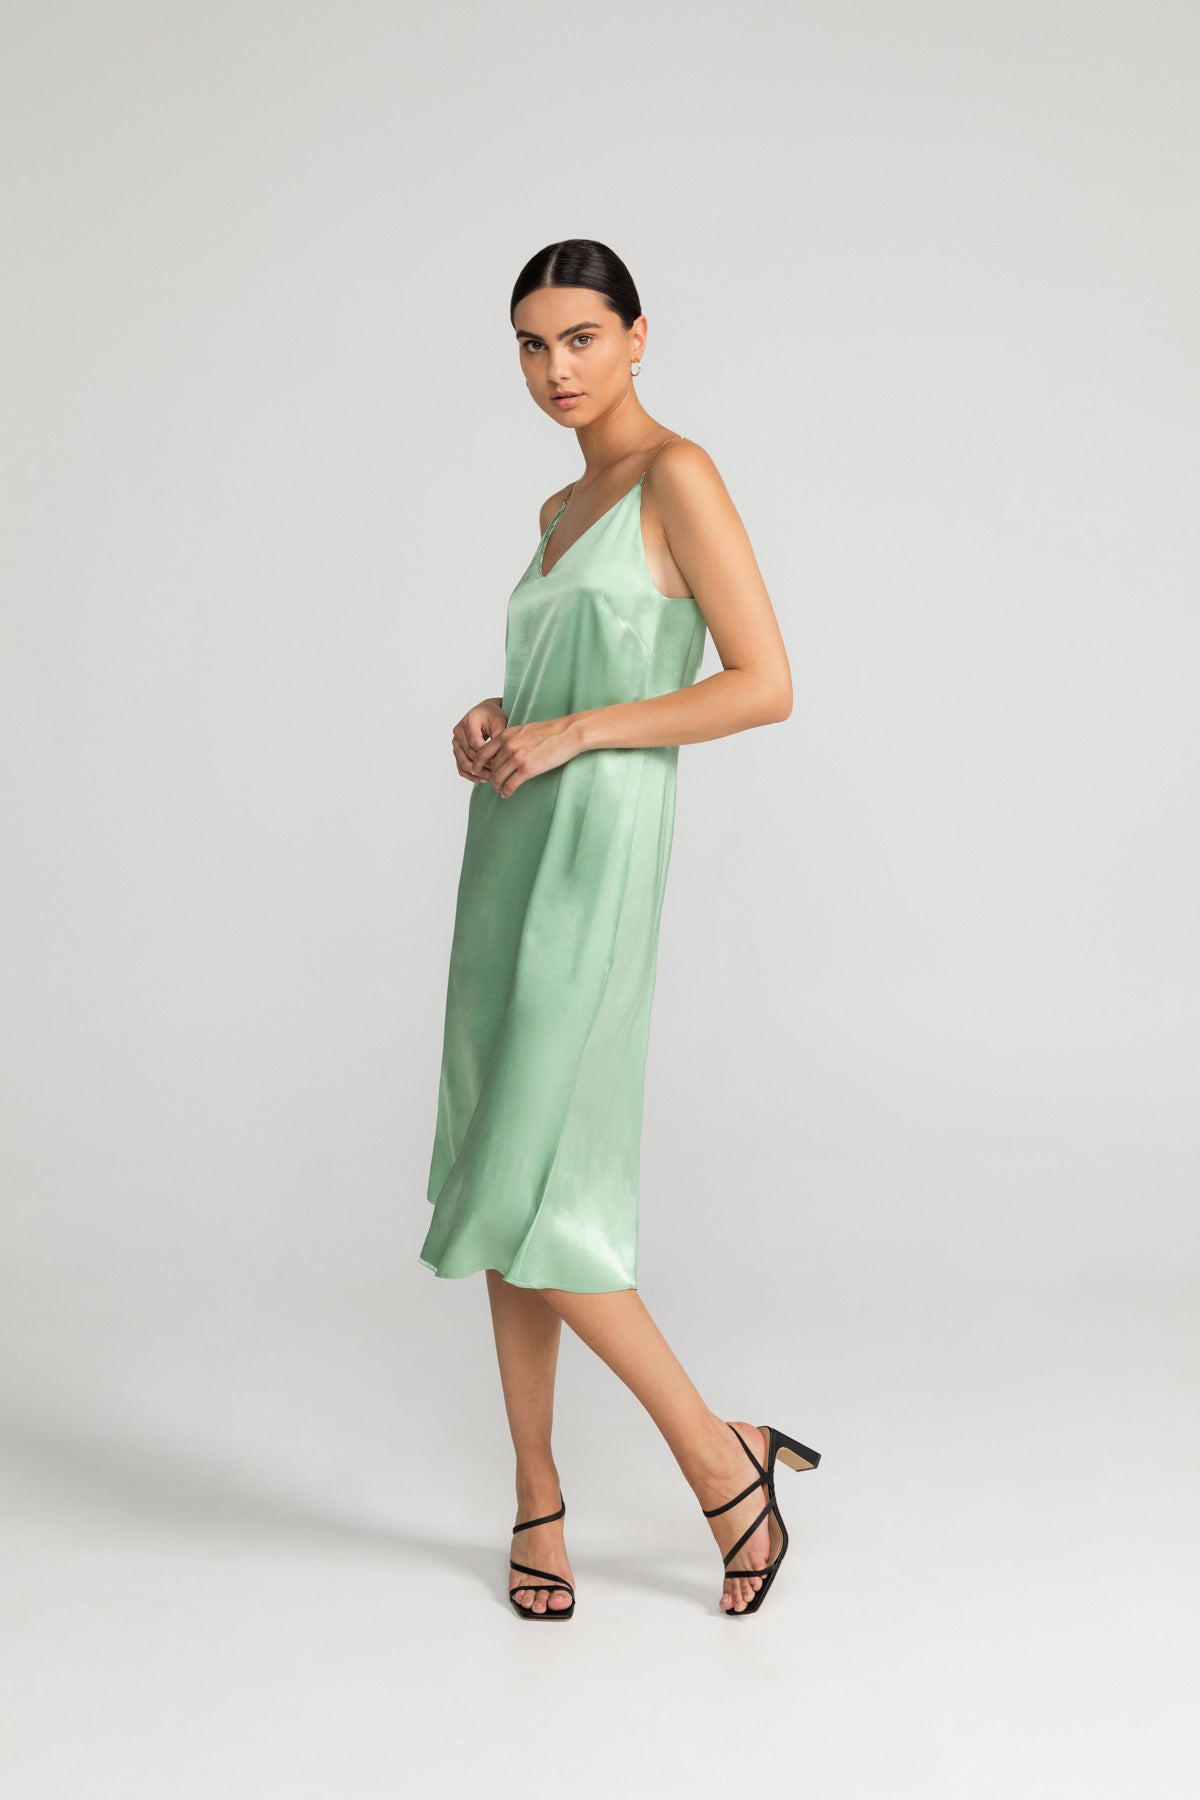 Dress ELANIE in Mild Green by LOVJOI made from sustainable ENKA® viscose and ECOVERO™